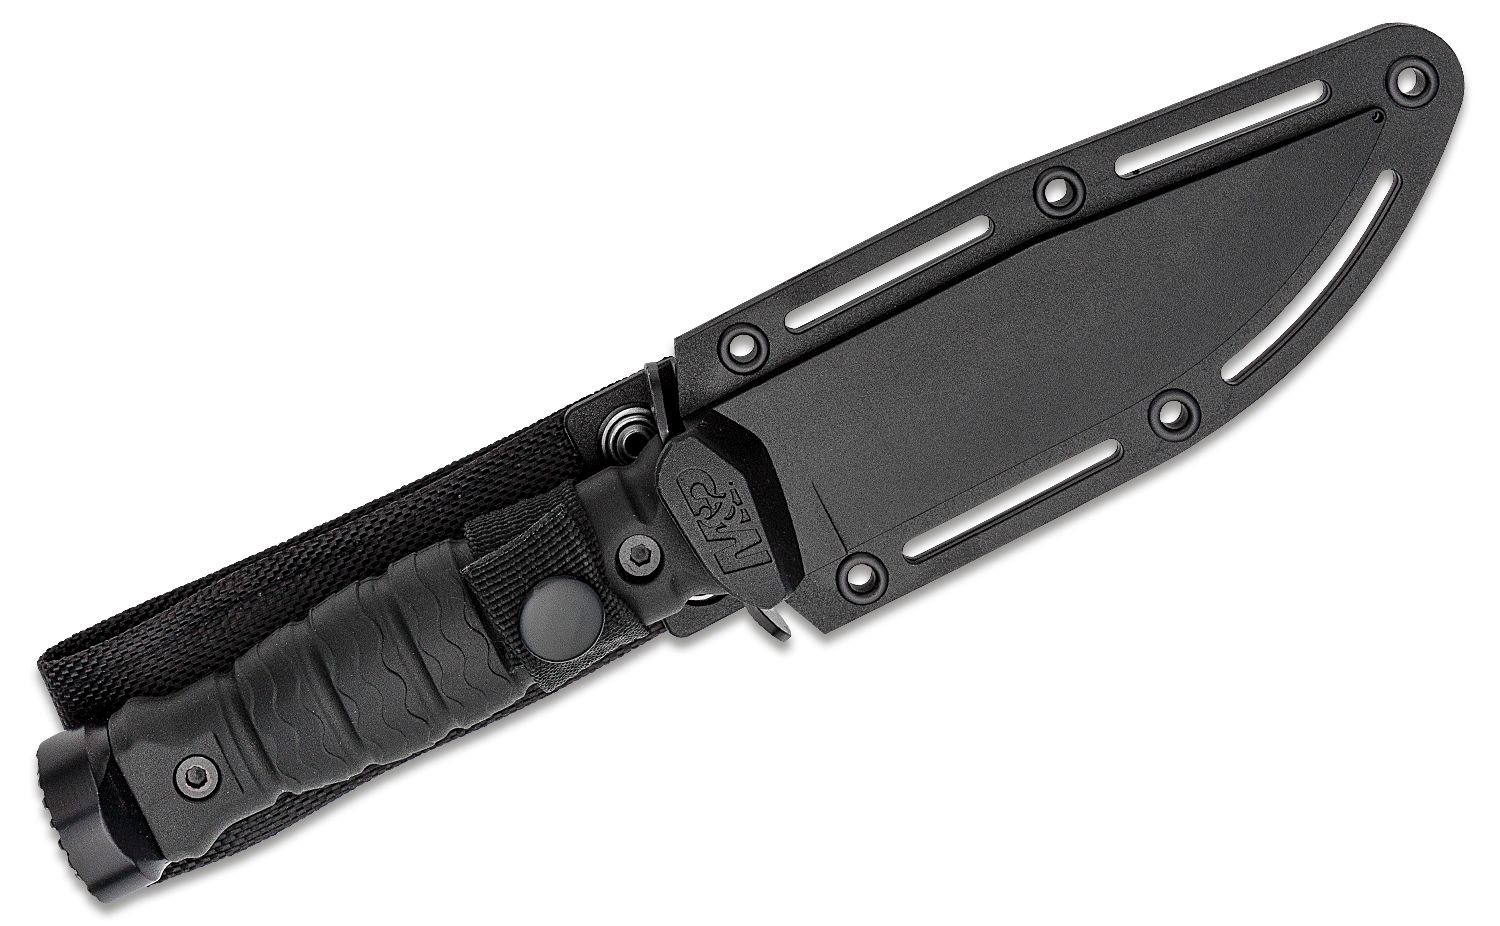 Smith & Wesson M&P Specials Ops Fixed Blade Knife 5 Black Bowie Blade,  Rubberized Polymer Handles, Hard Synthetic Sheath - KnifeCenter - 1122583